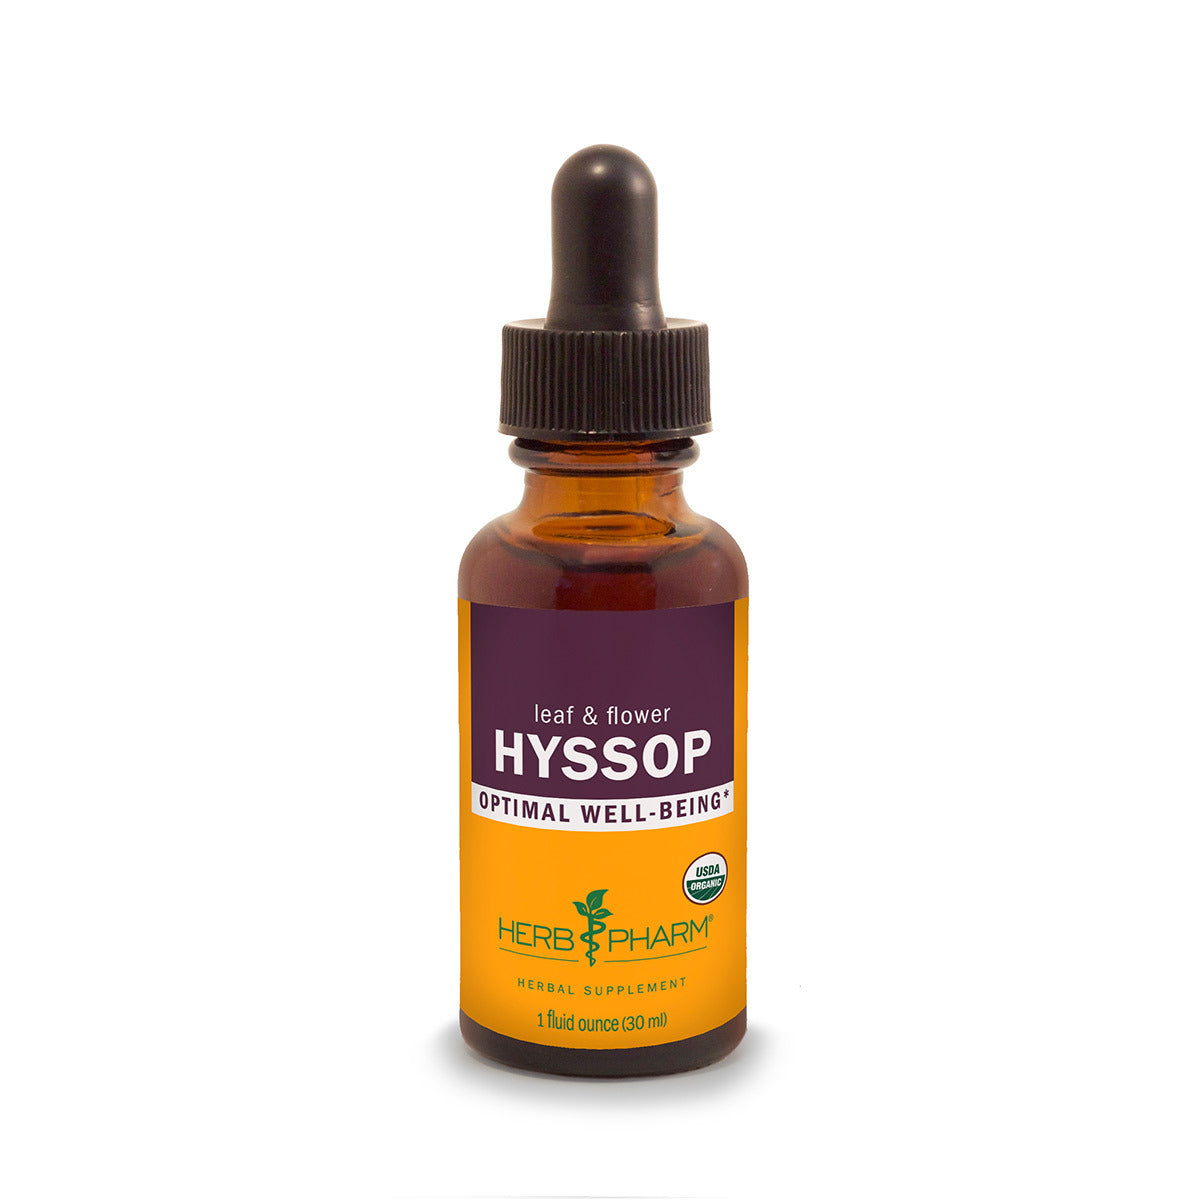 Primary image of Hyssop Extract